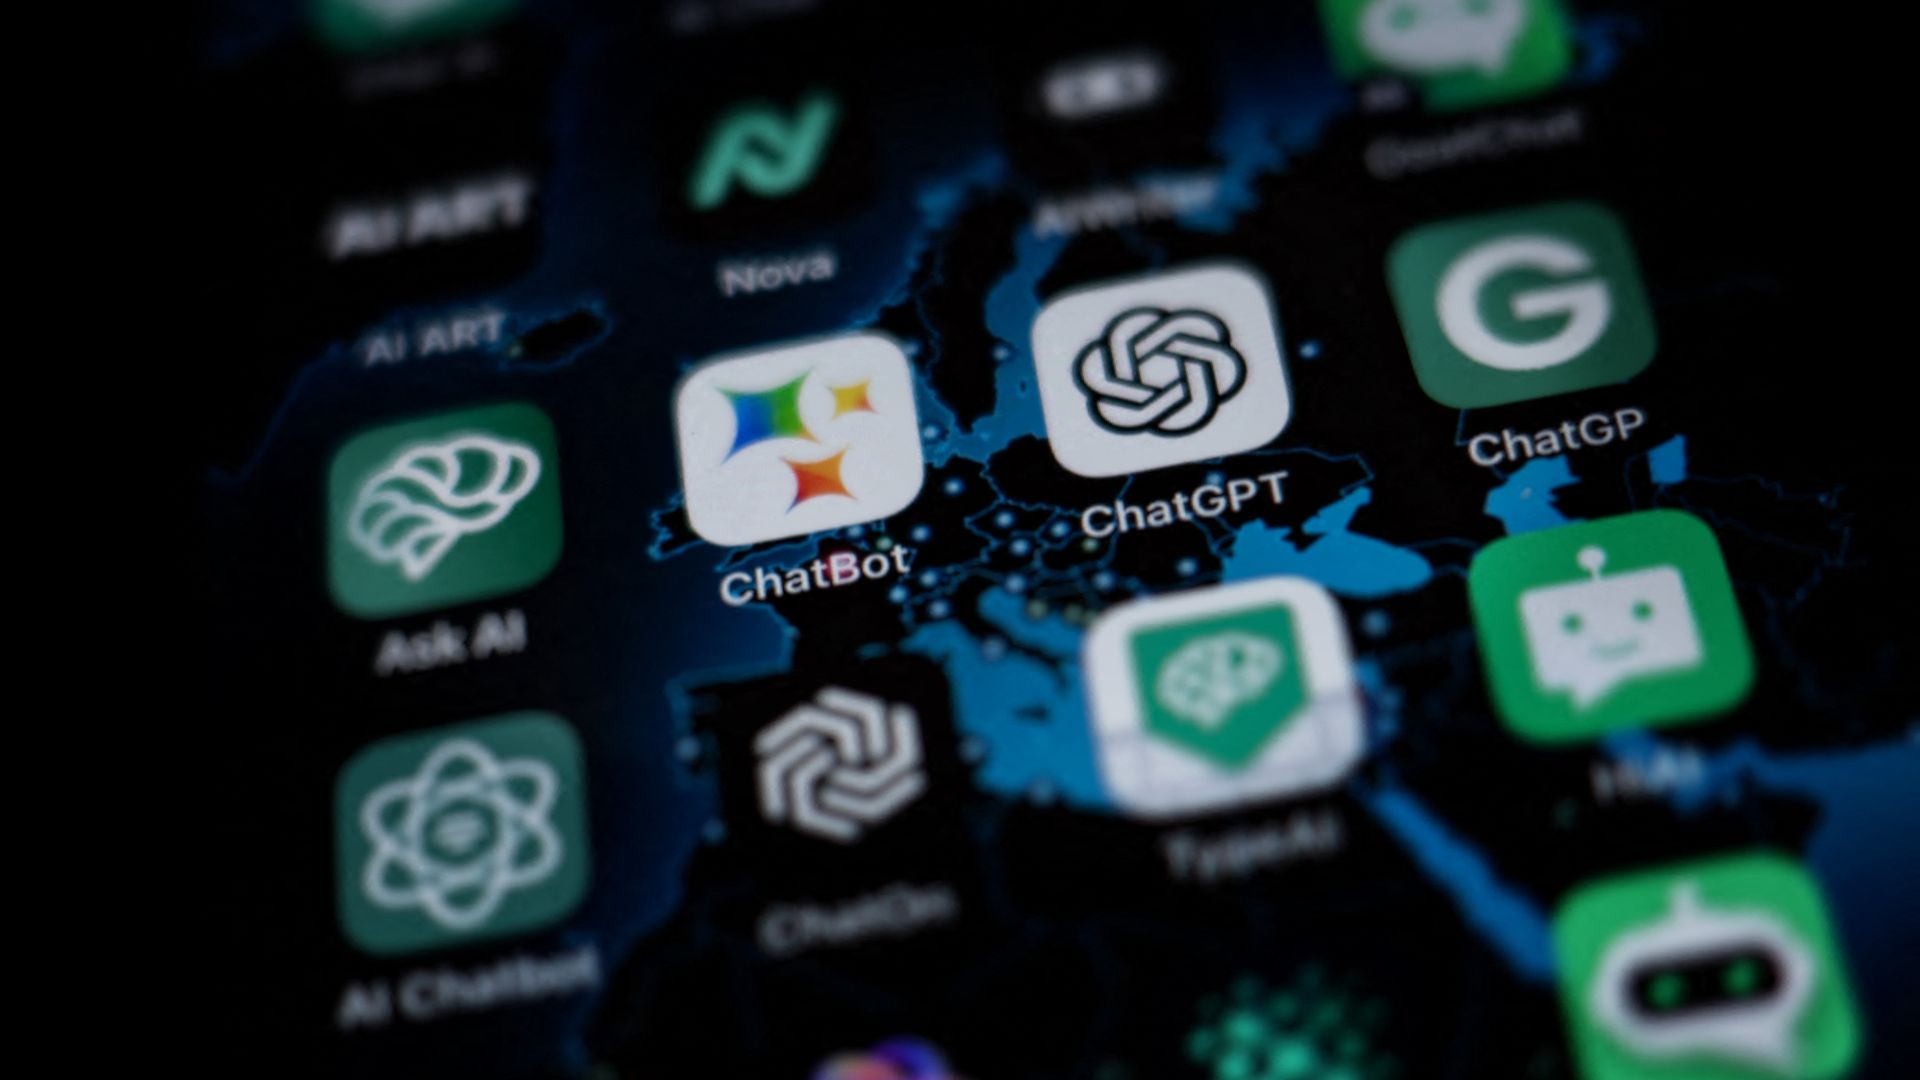 Photo of a phone screen showing a host of AI apps including ChatGPT and ChatBot